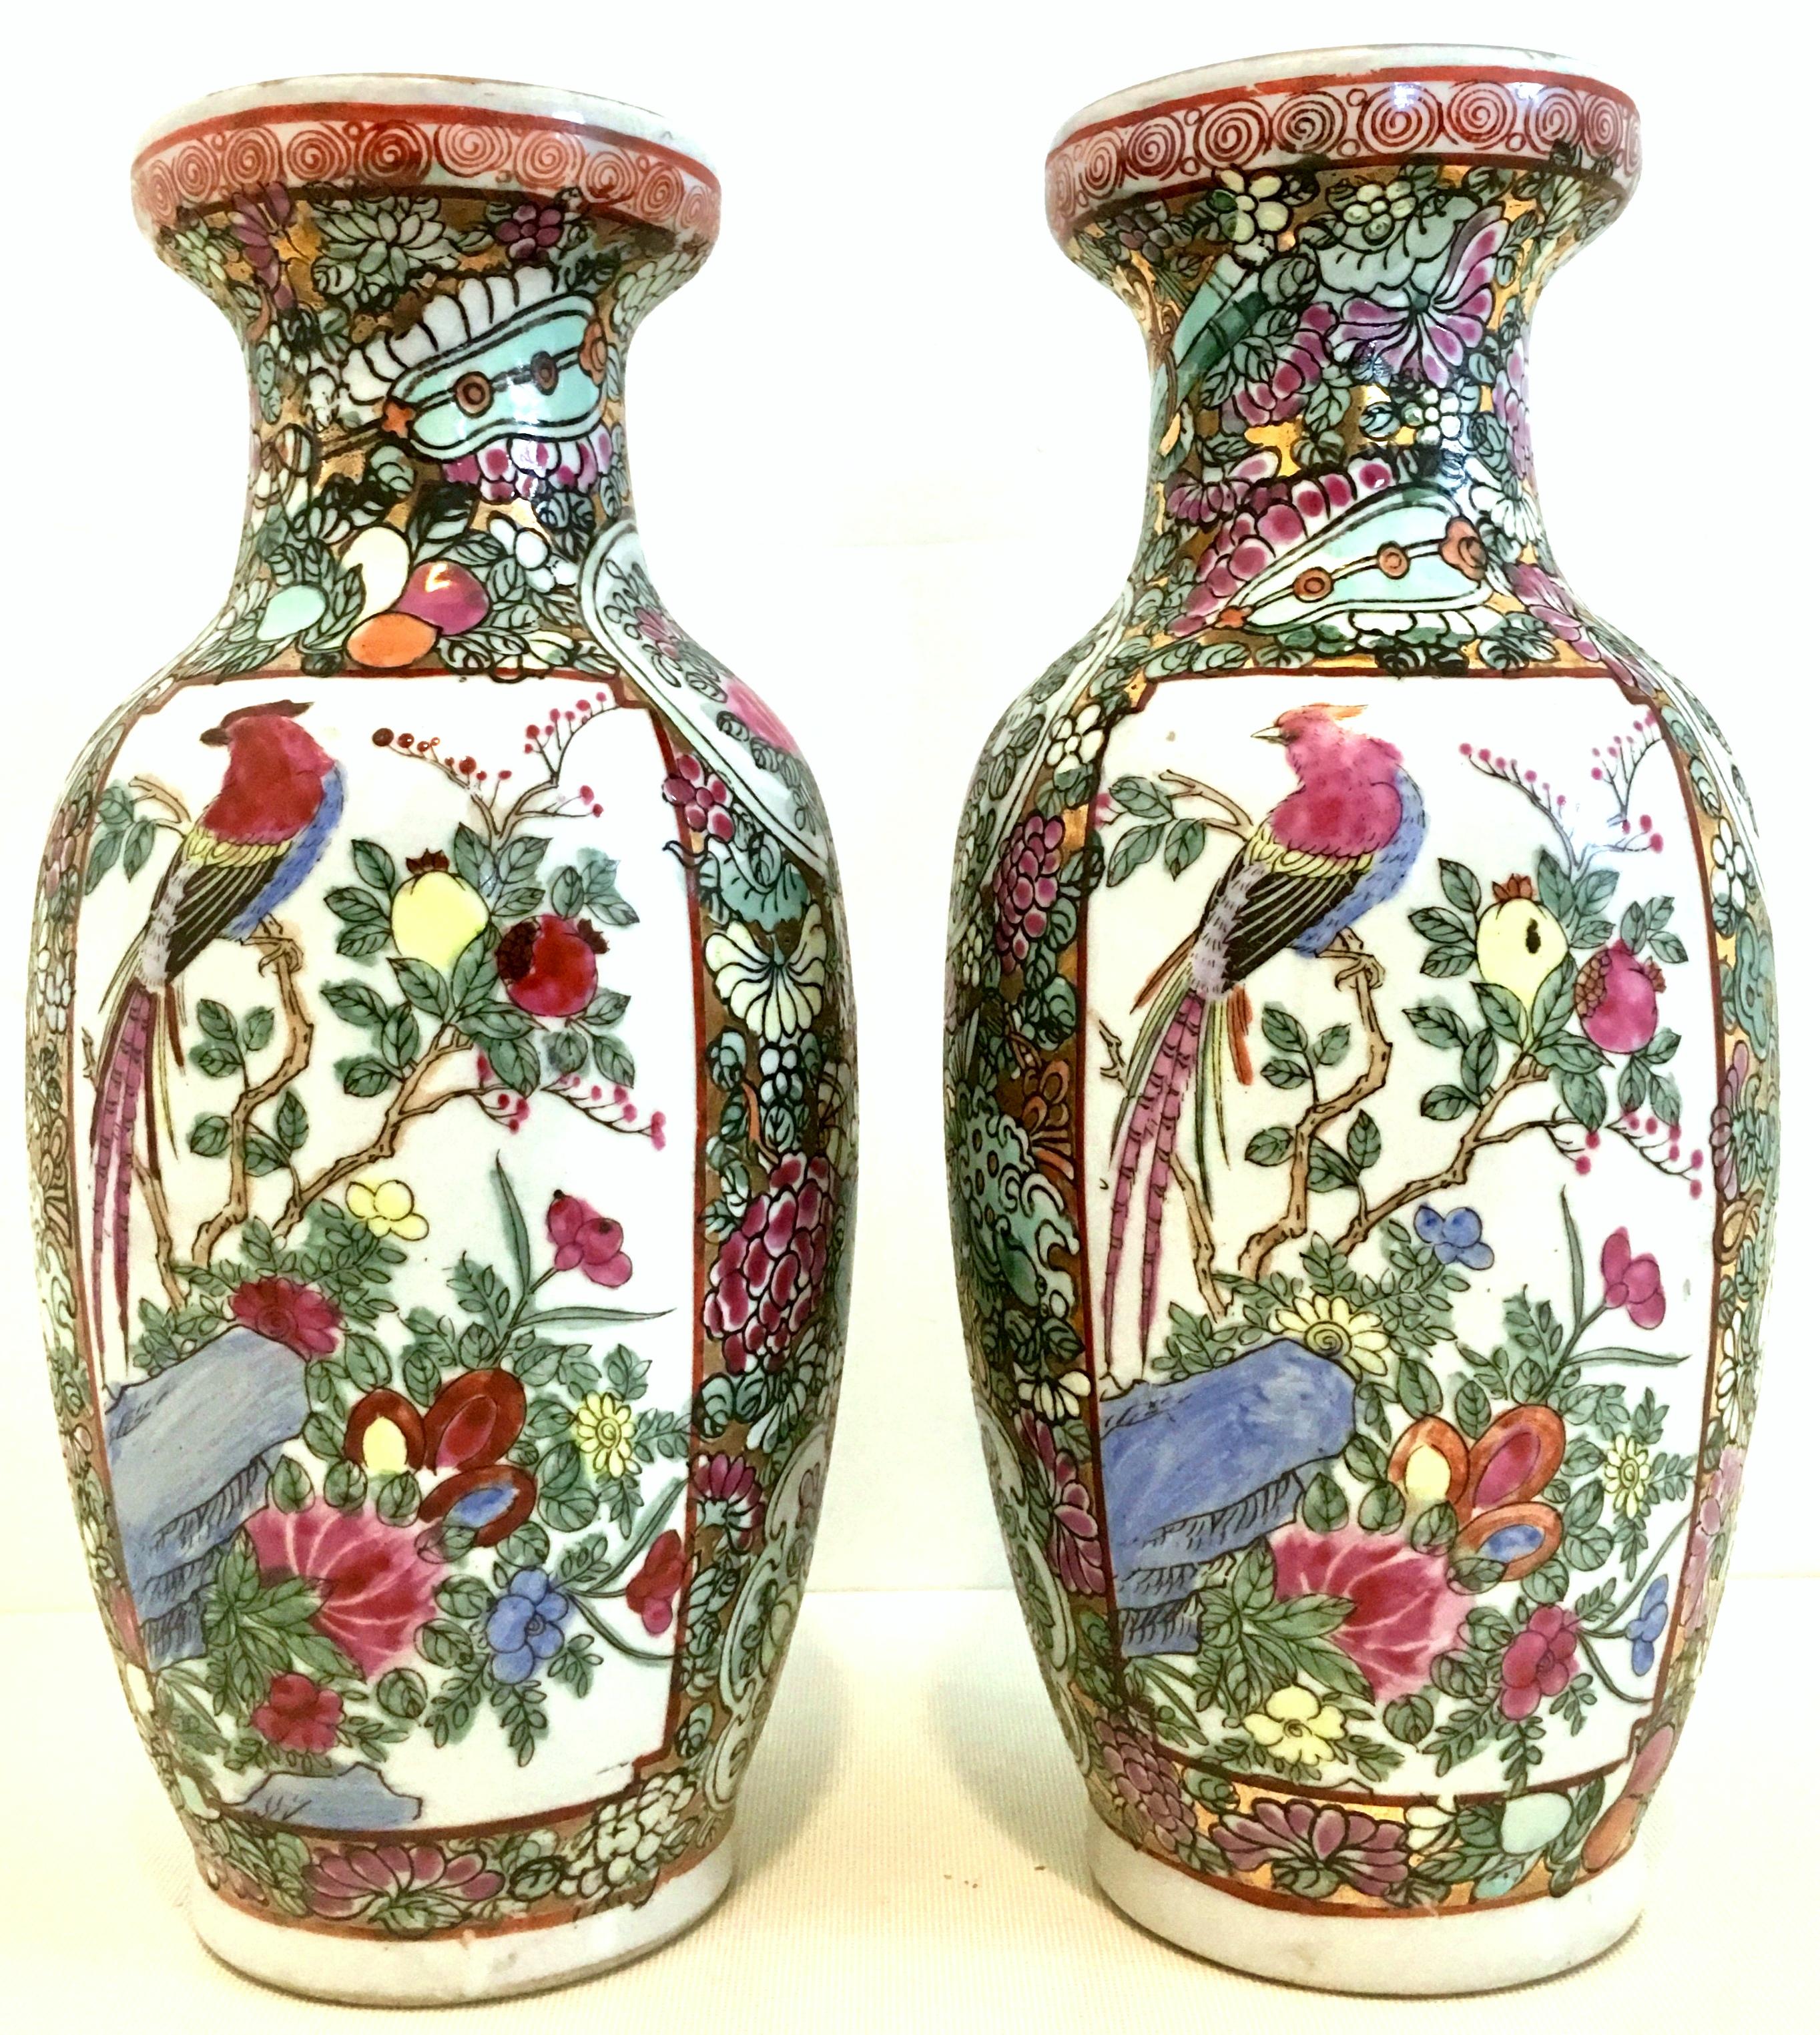 20th century Chinese Export porcelain hand painted famille rose pair of vases-Signed-Qianlong chop mark on each vase. These hand made, hand painted pair of porcelain and 22K gold detail vases depict double sided and opposite motif panel of birds on